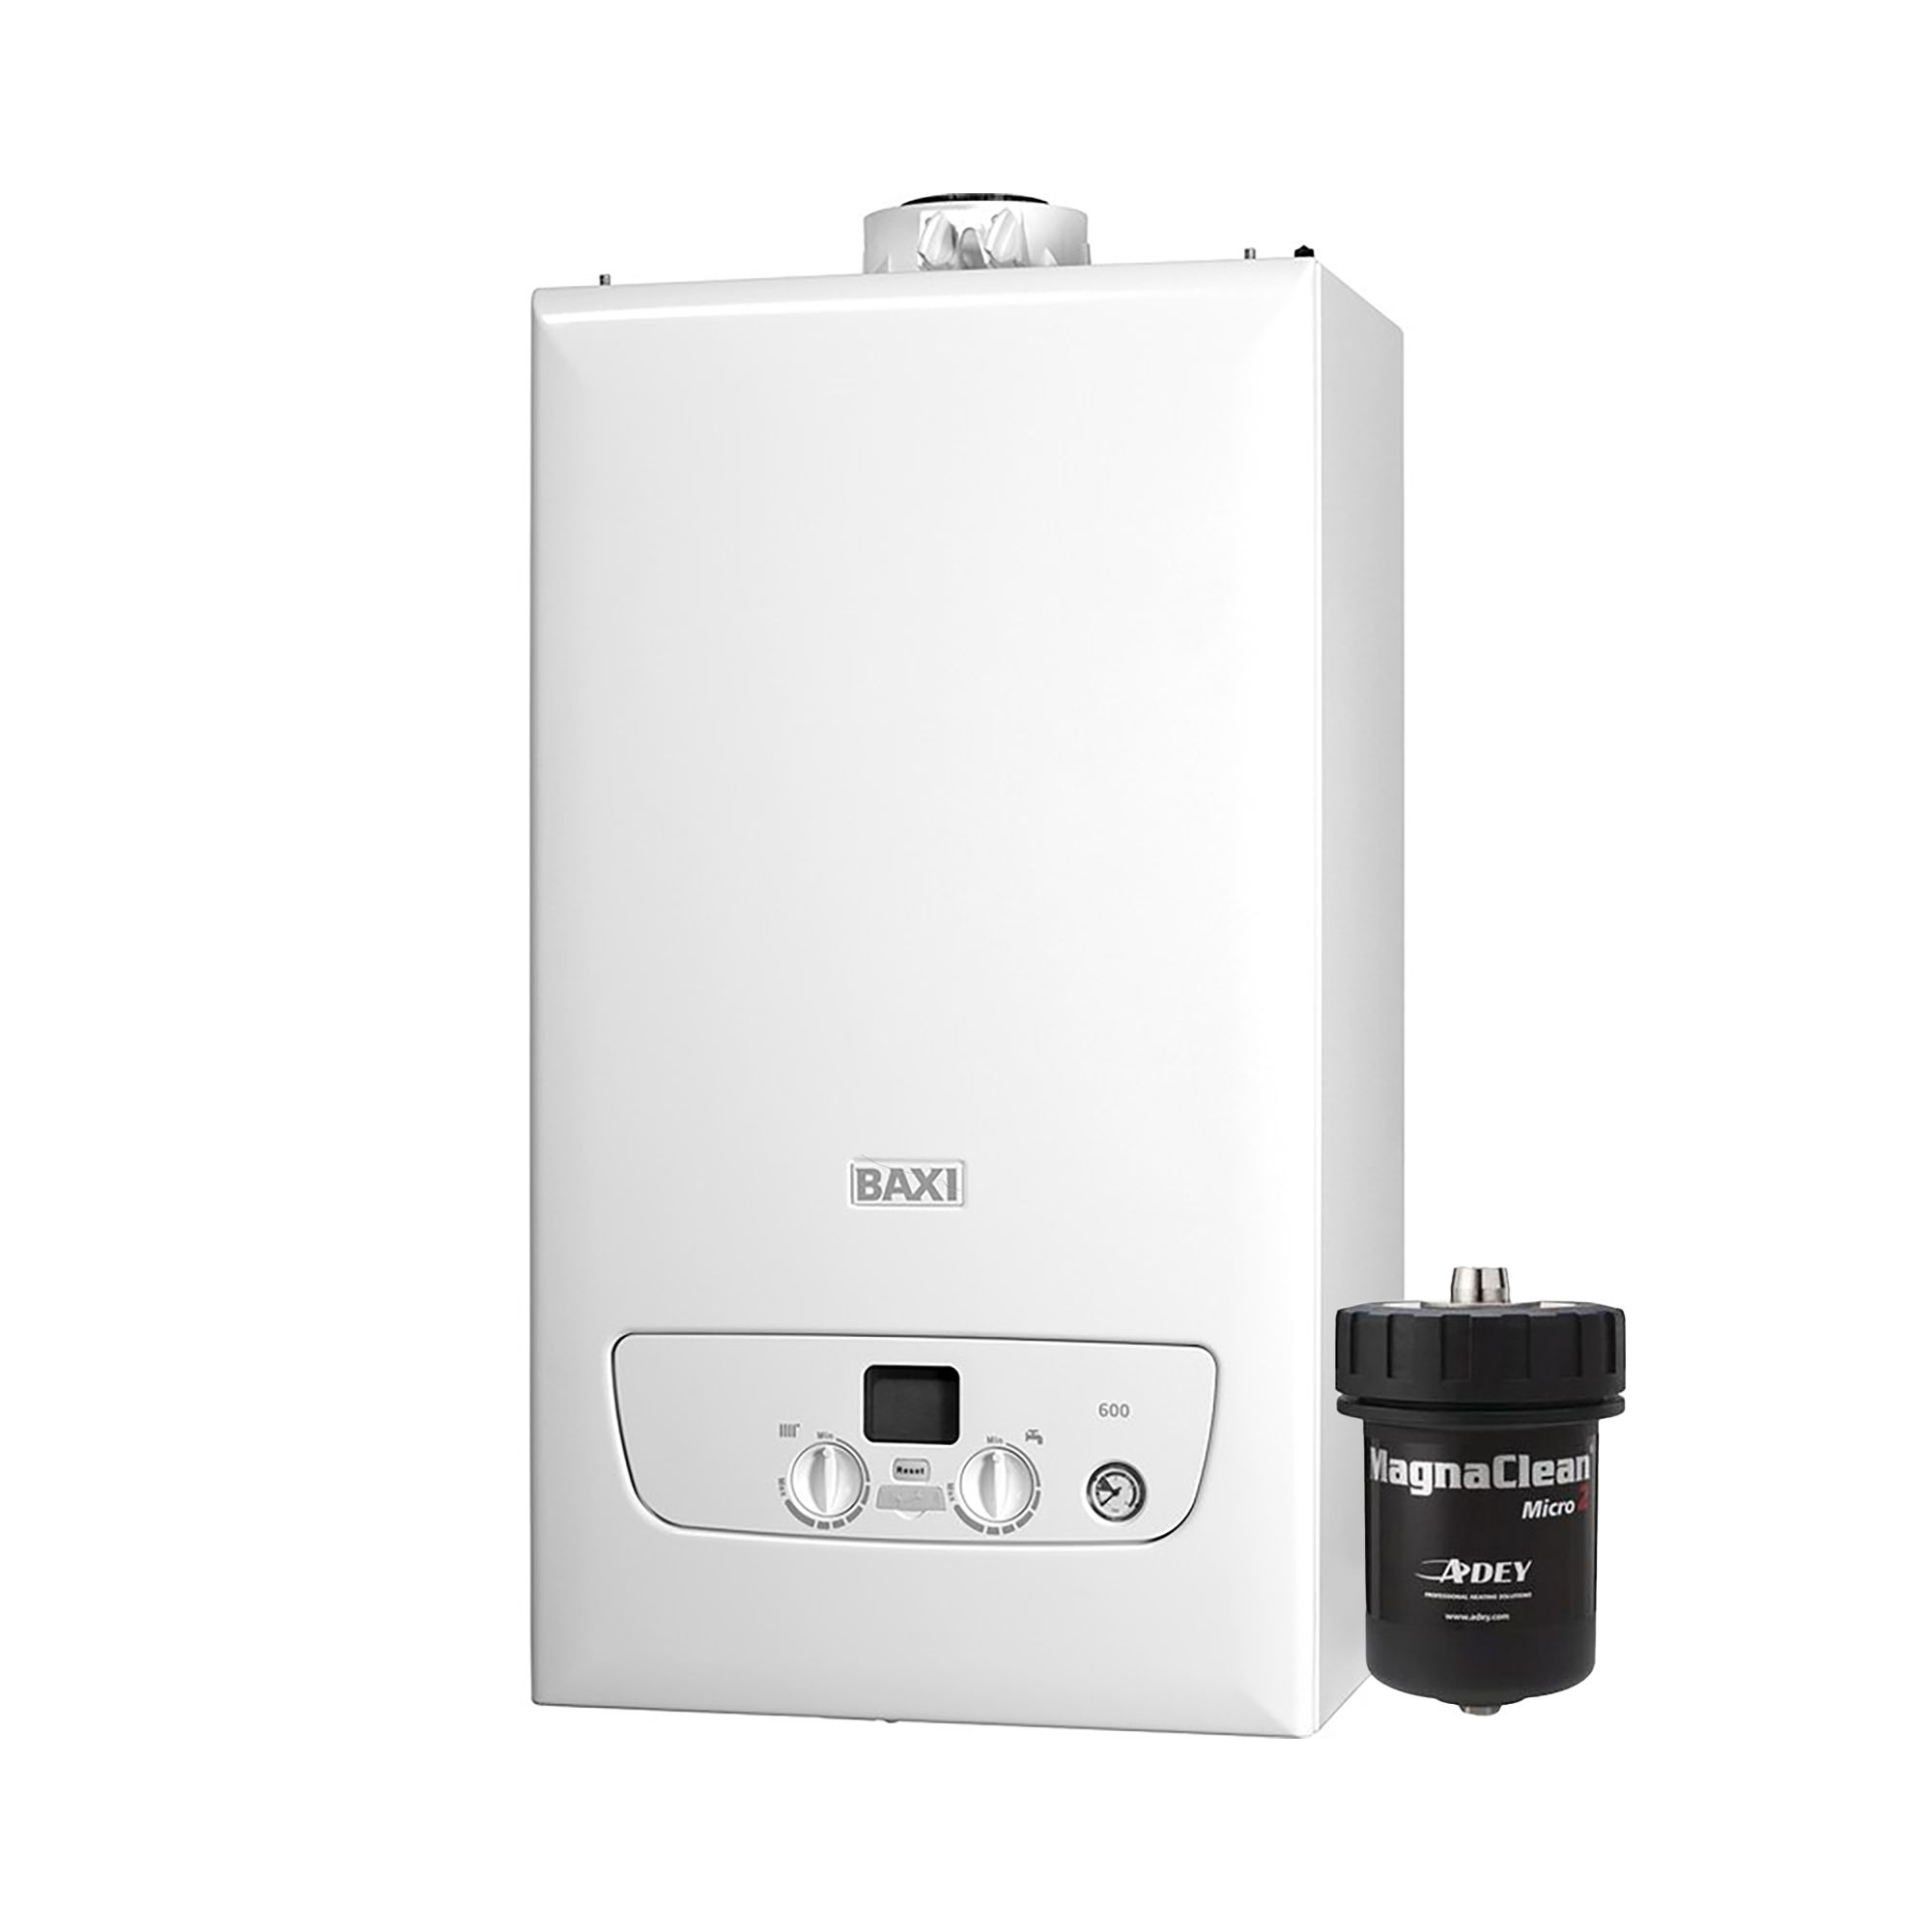 Baxi 825 Natural Gas Combi Boiler Complete with Magnaclean Micro 2 Filter (10 Year Warranty) 7732189